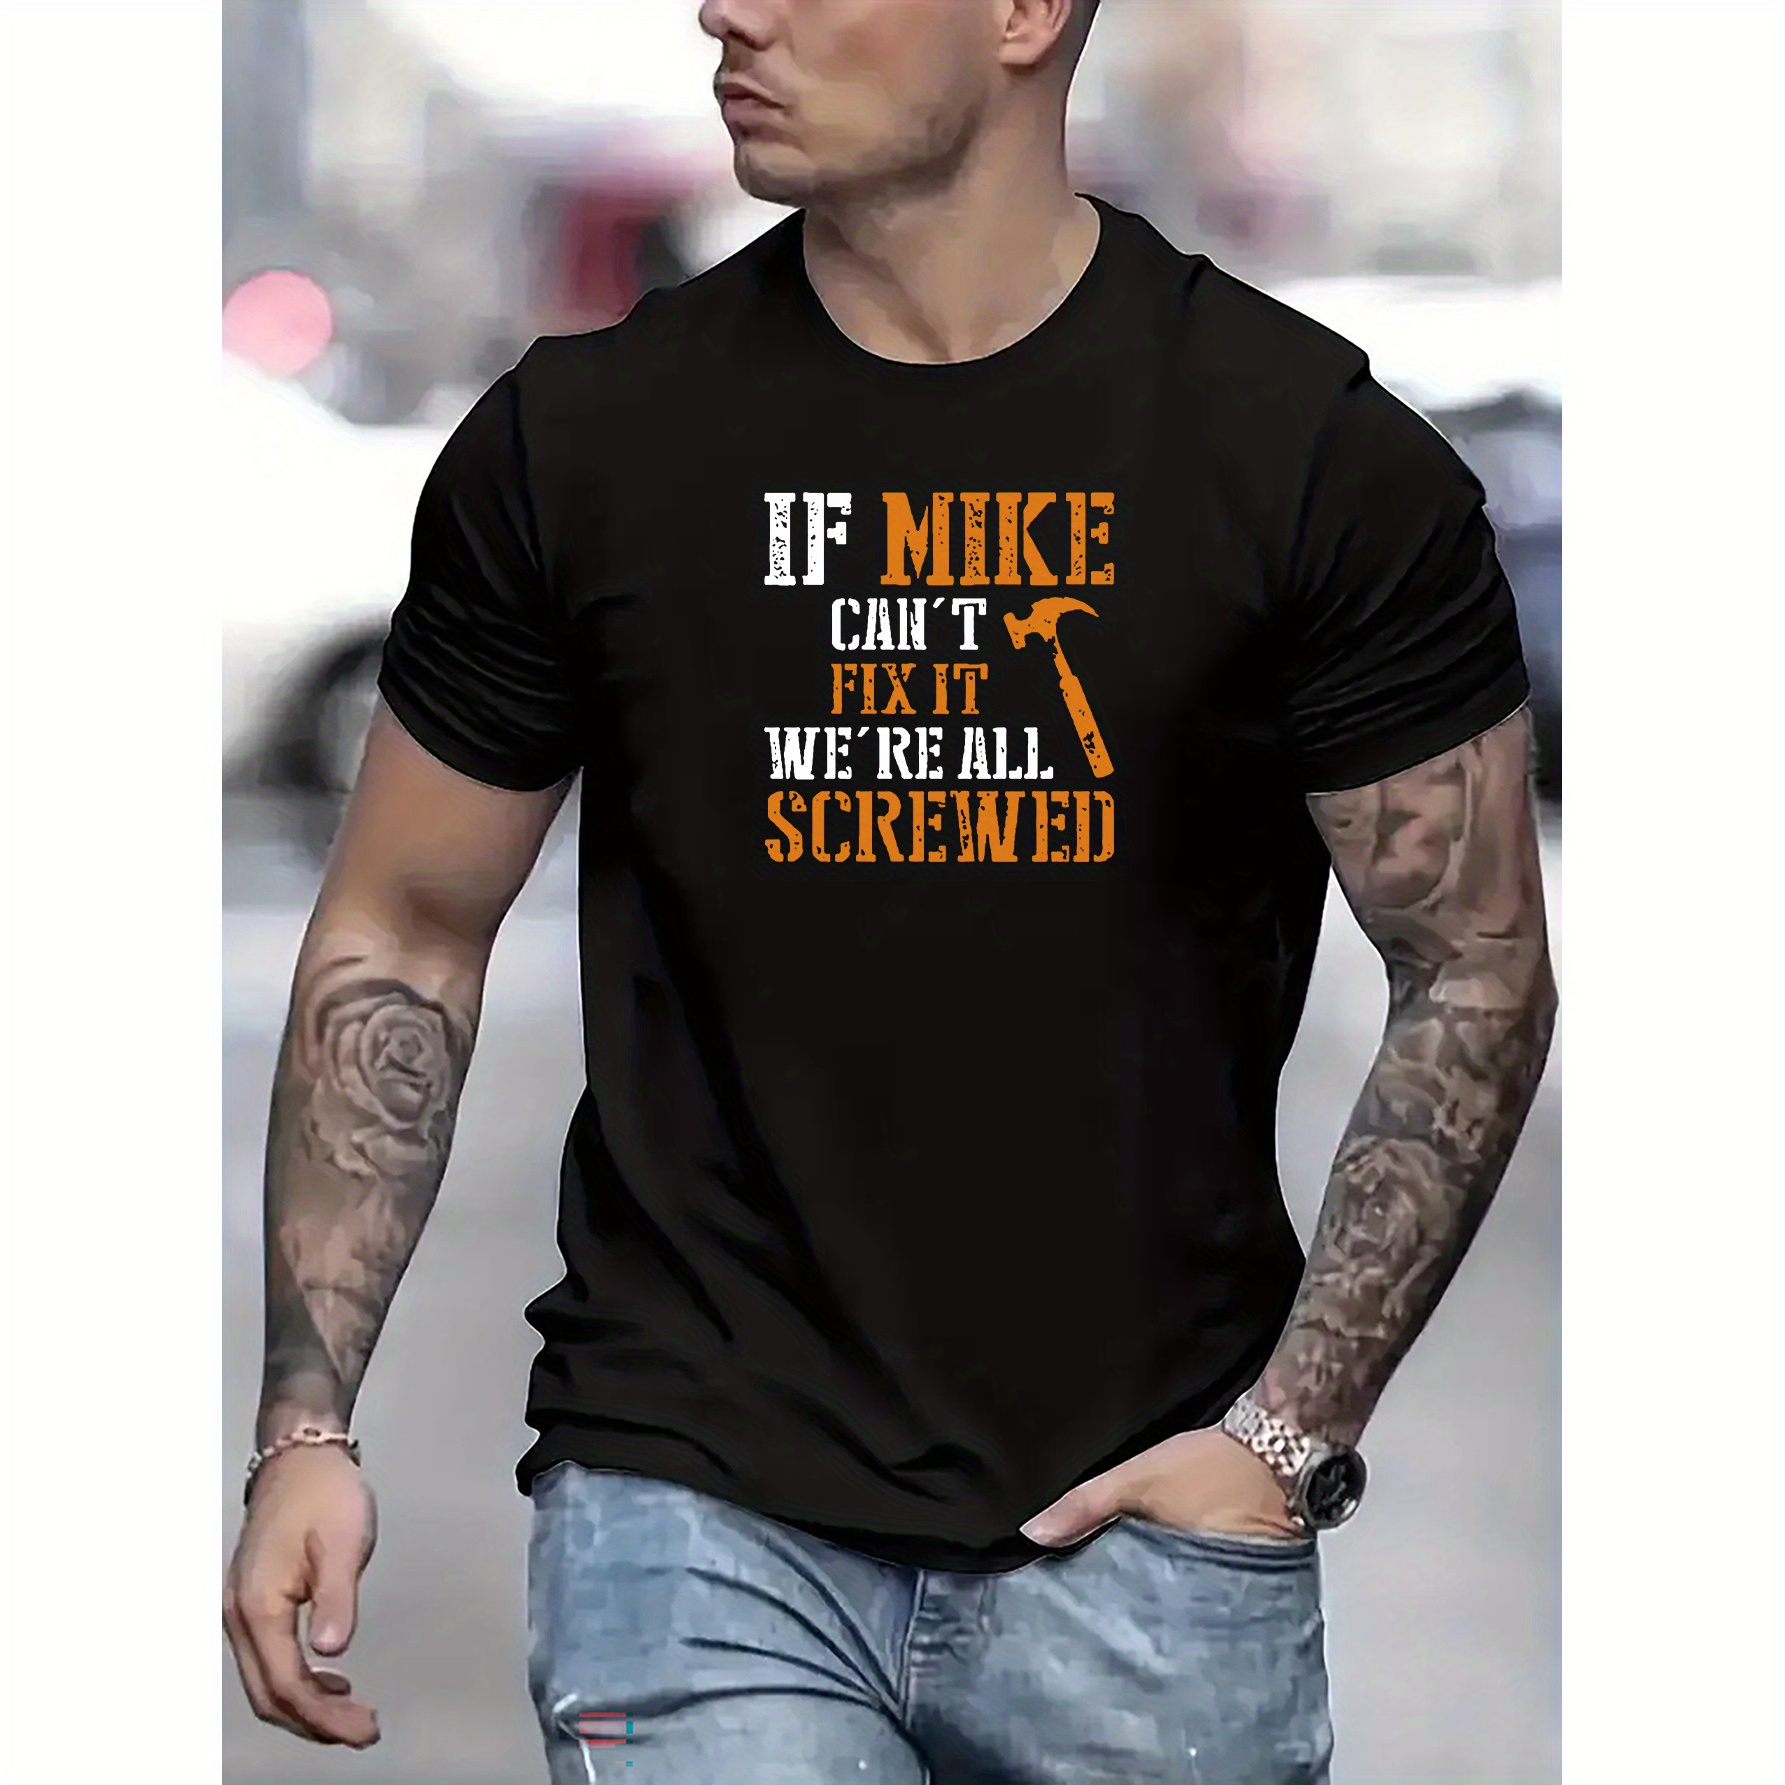 

If Mike Can't Fix It Print T Shirt, Tees For Men, Casual Short Sleeve T-shirt For Summer